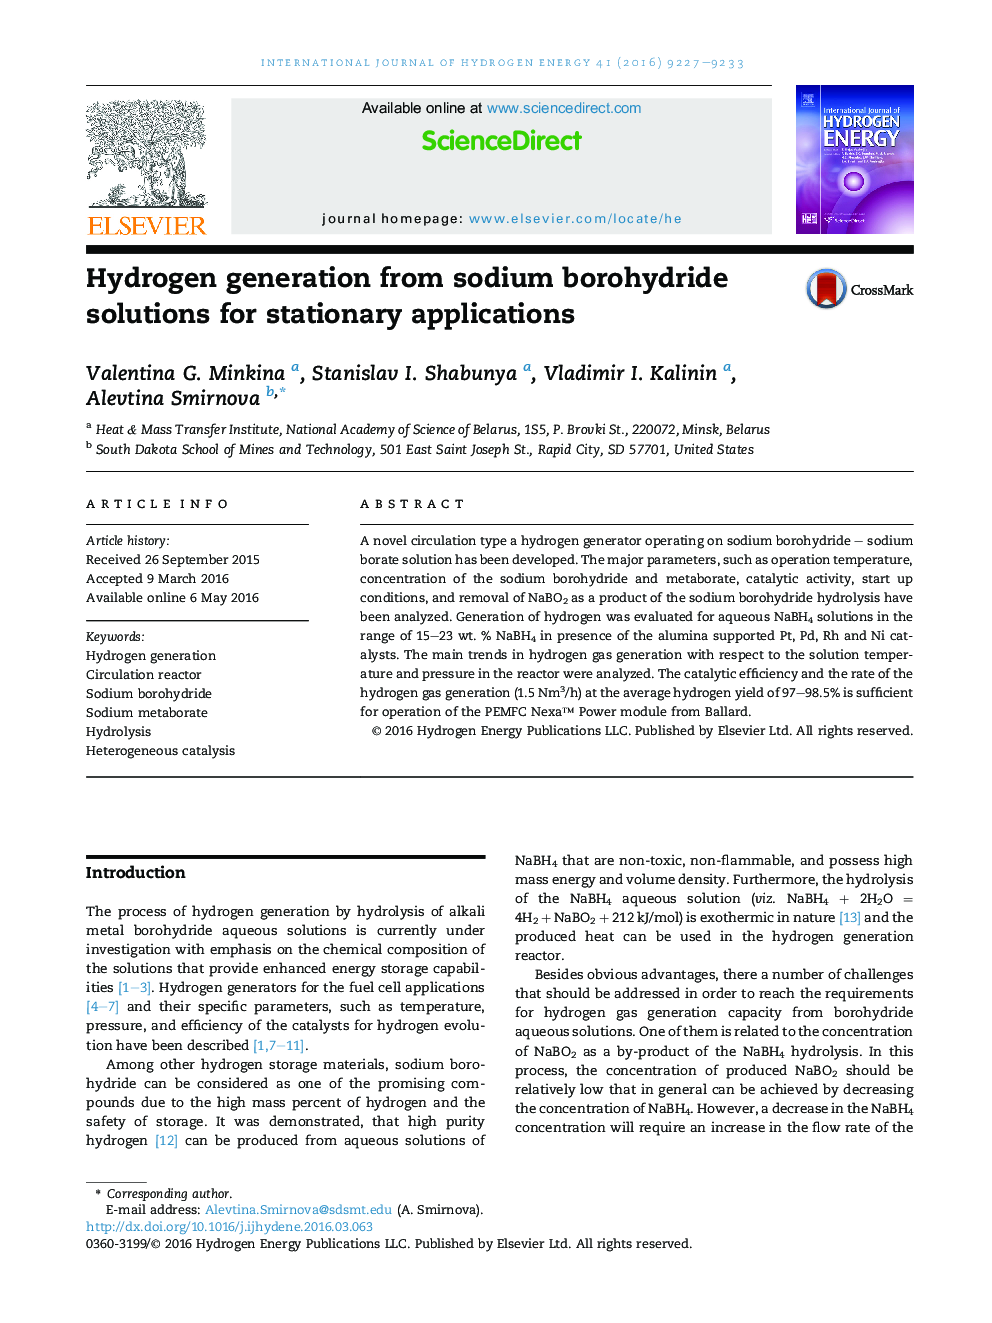 Hydrogen generation from sodium borohydride solutions for stationary applications